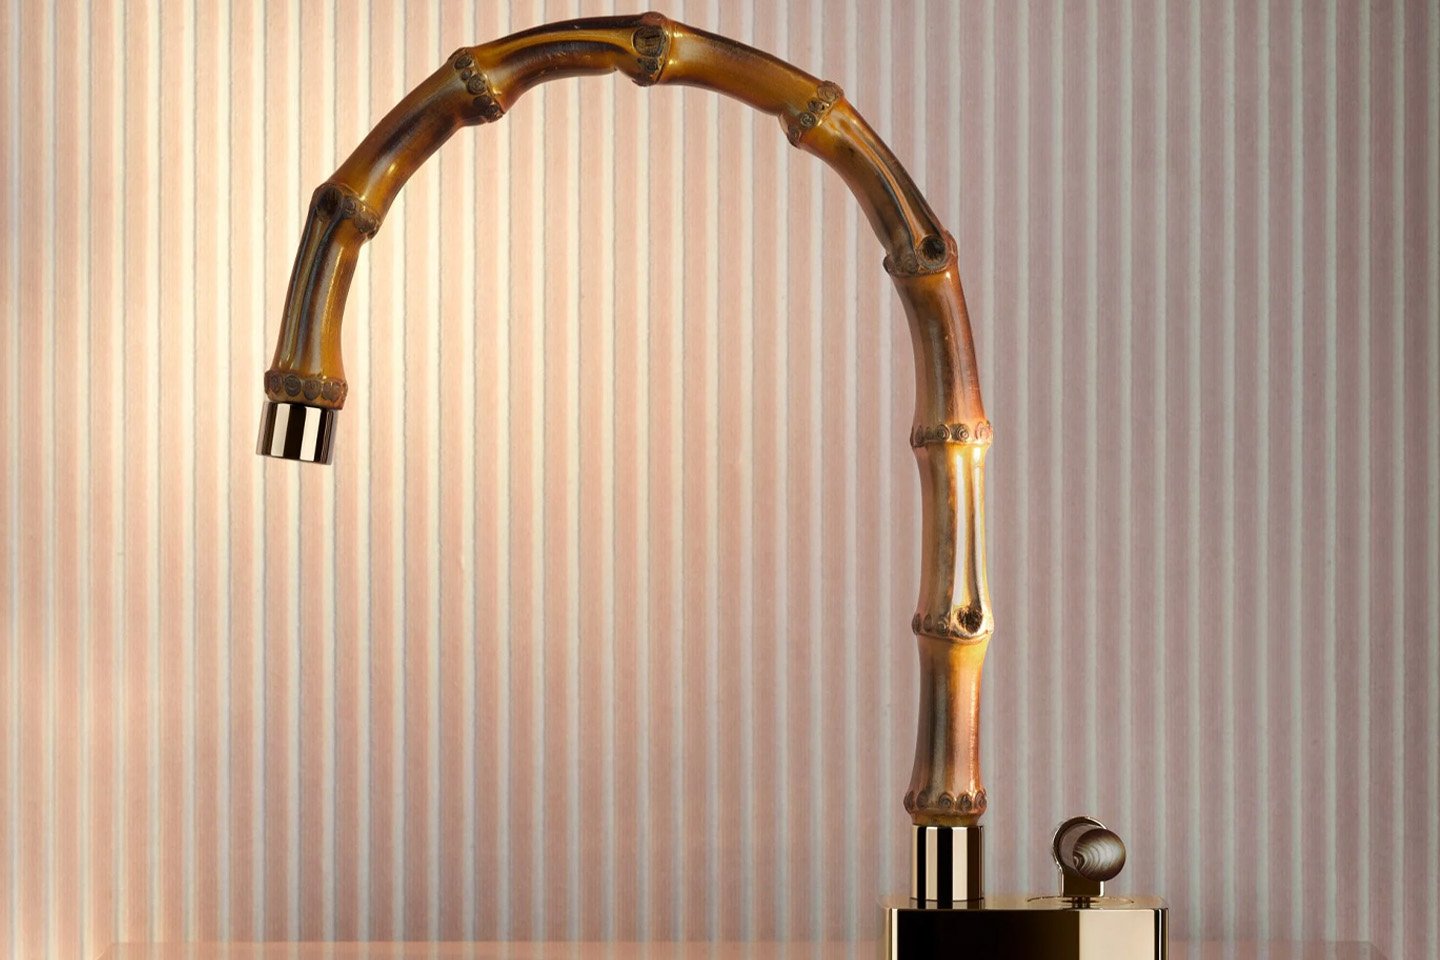 #The fanciest tap I’ve ever seen is built from bamboo & is super sustainable…